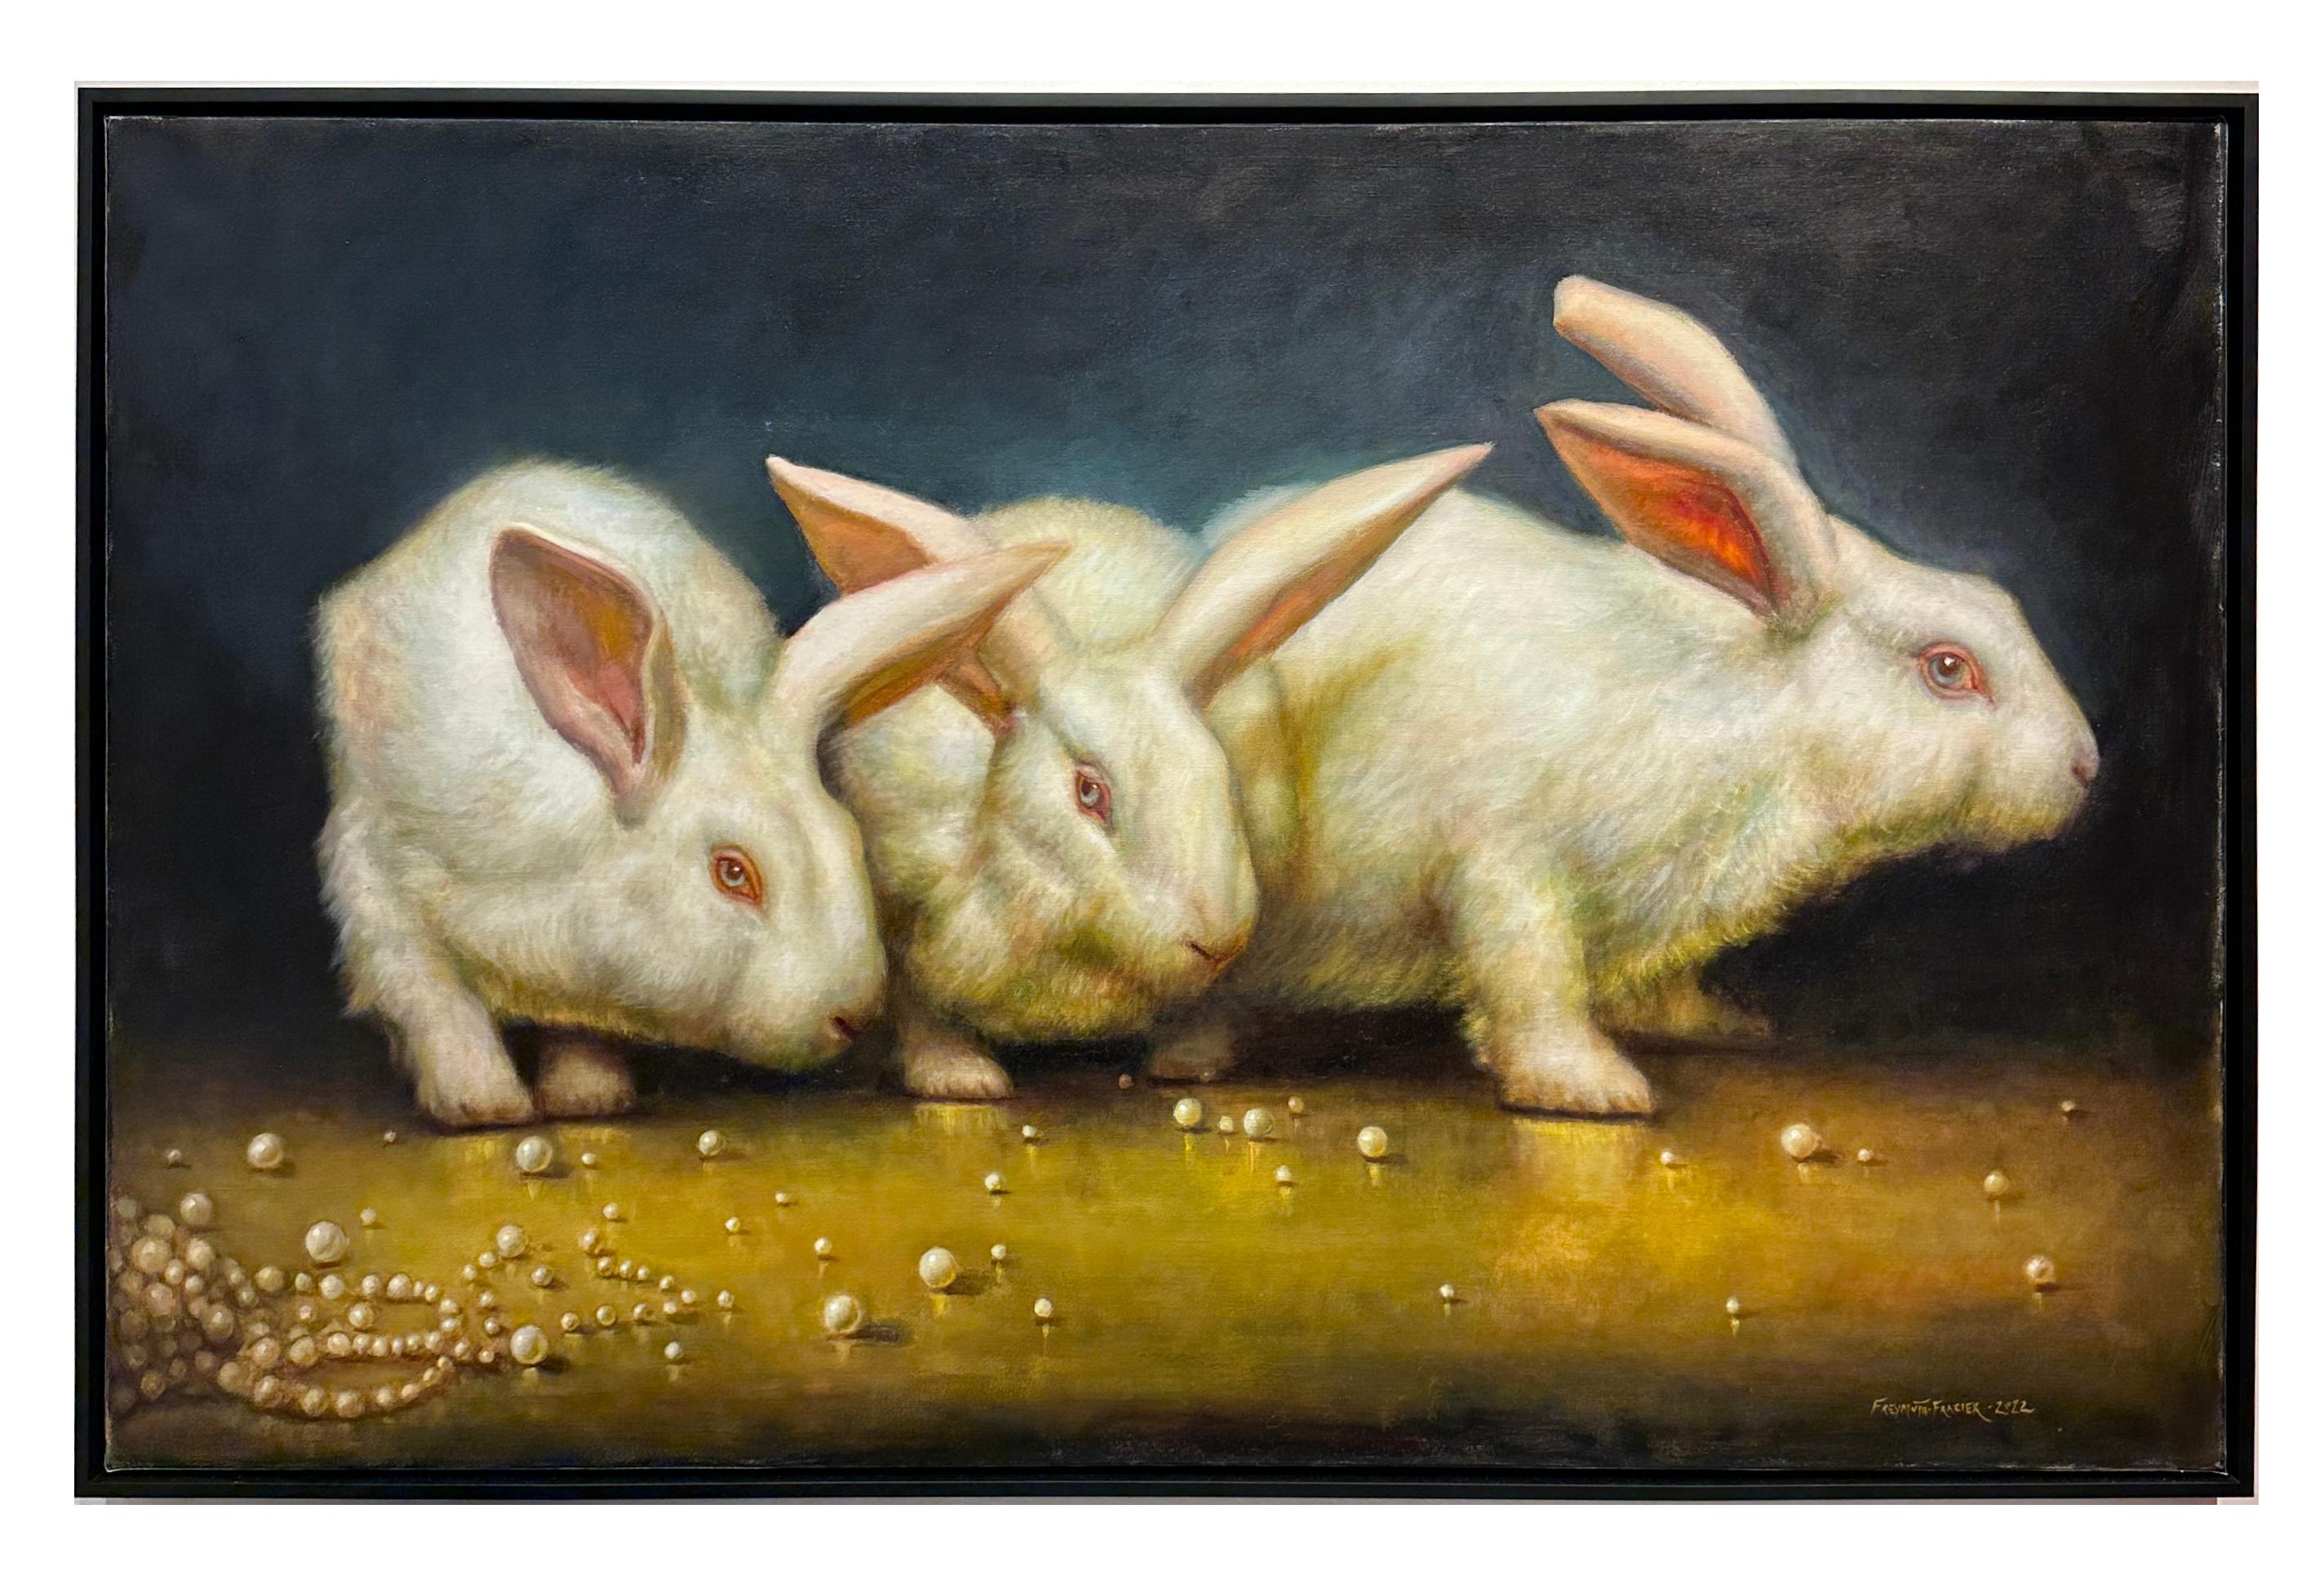 Rose Freymuth-Frazier Figurative Painting - The Wise Ones - Three Rabbits Amongst a Broken Strand of Pearls, Original Oil